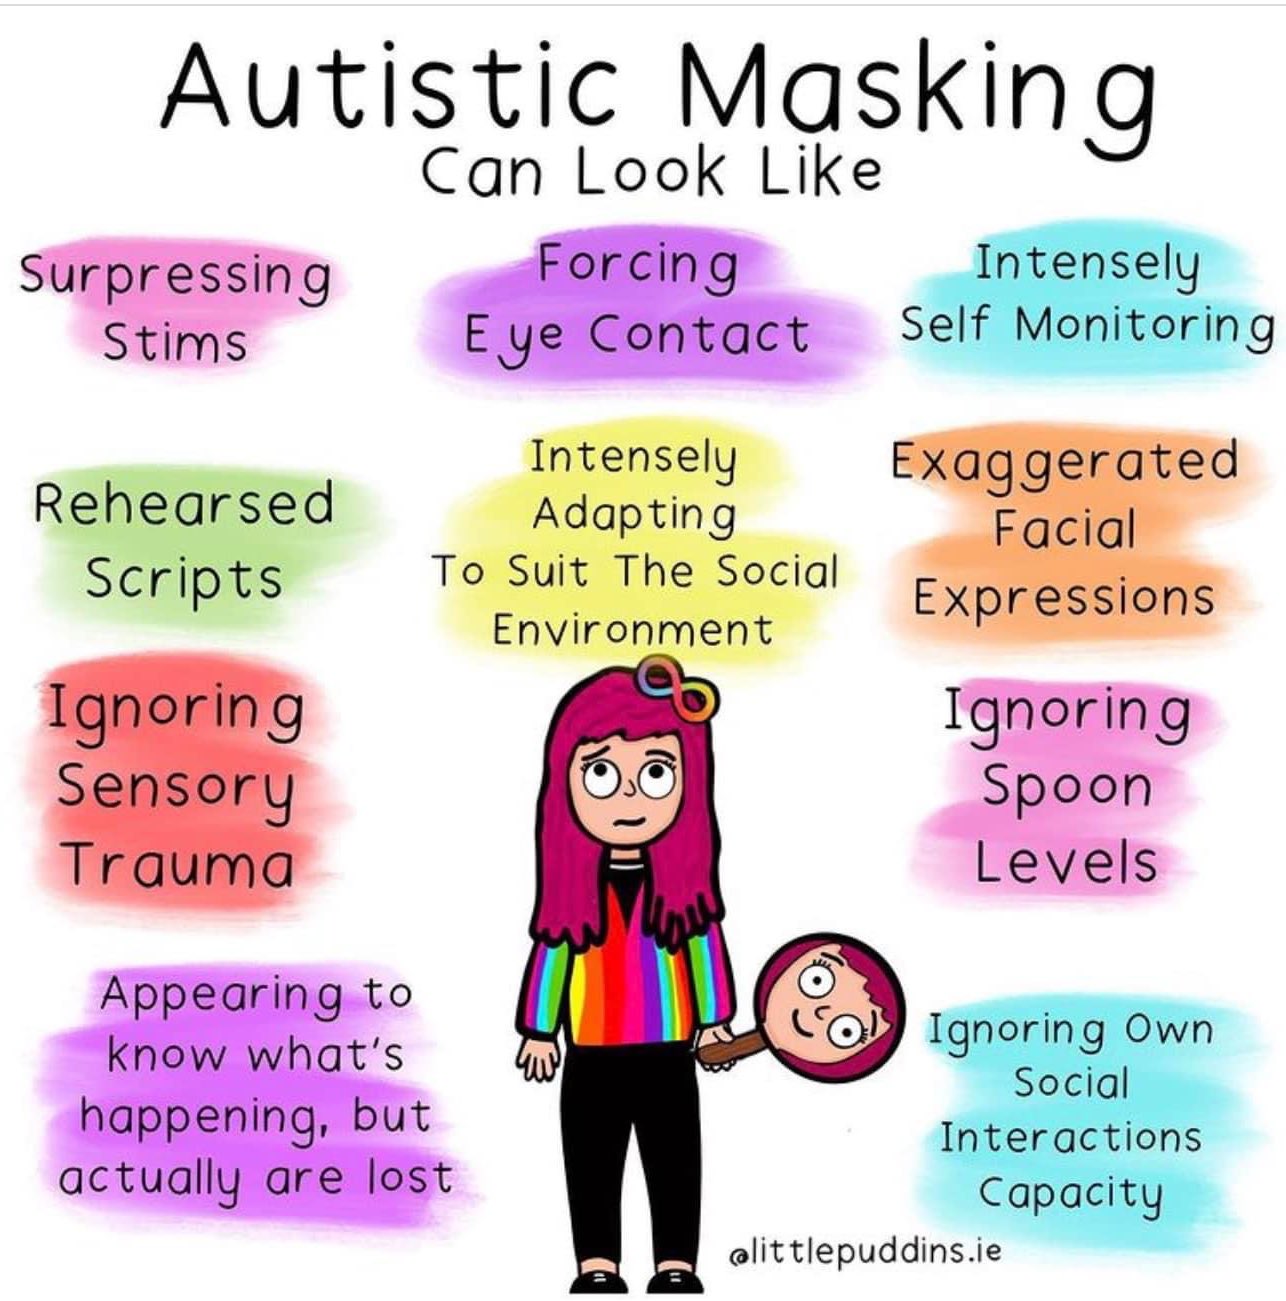 Autism-101 on Twitter: "Autistic masking from person to person. What are some your masking characteristics? #AskingAutistics #ActuallyAutistic https://t.co/8h0kvGVONH" / X